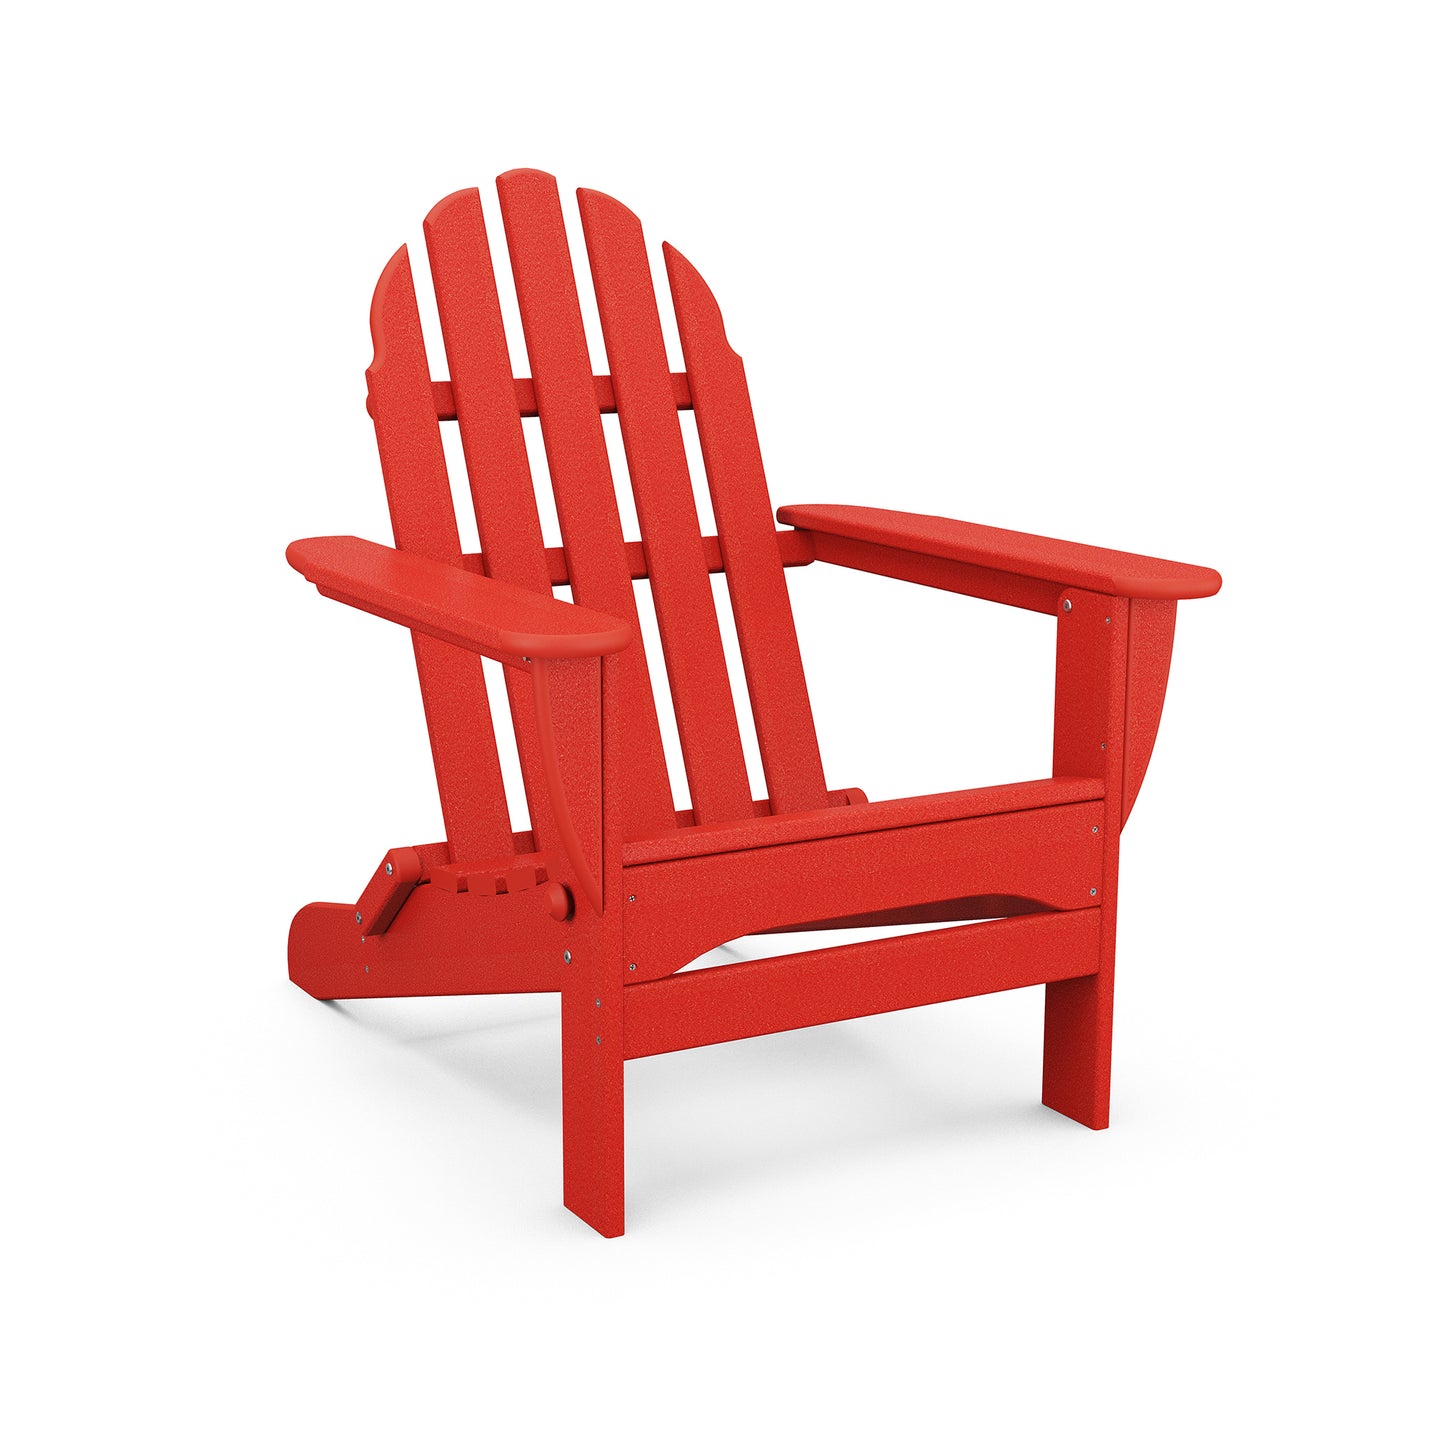 A bright red POLYWOOD® Classic Folding Adirondack chair isolated on a white background. The chair has a classic design with wide slats and a slightly reclined back, suitable for outdoor use.